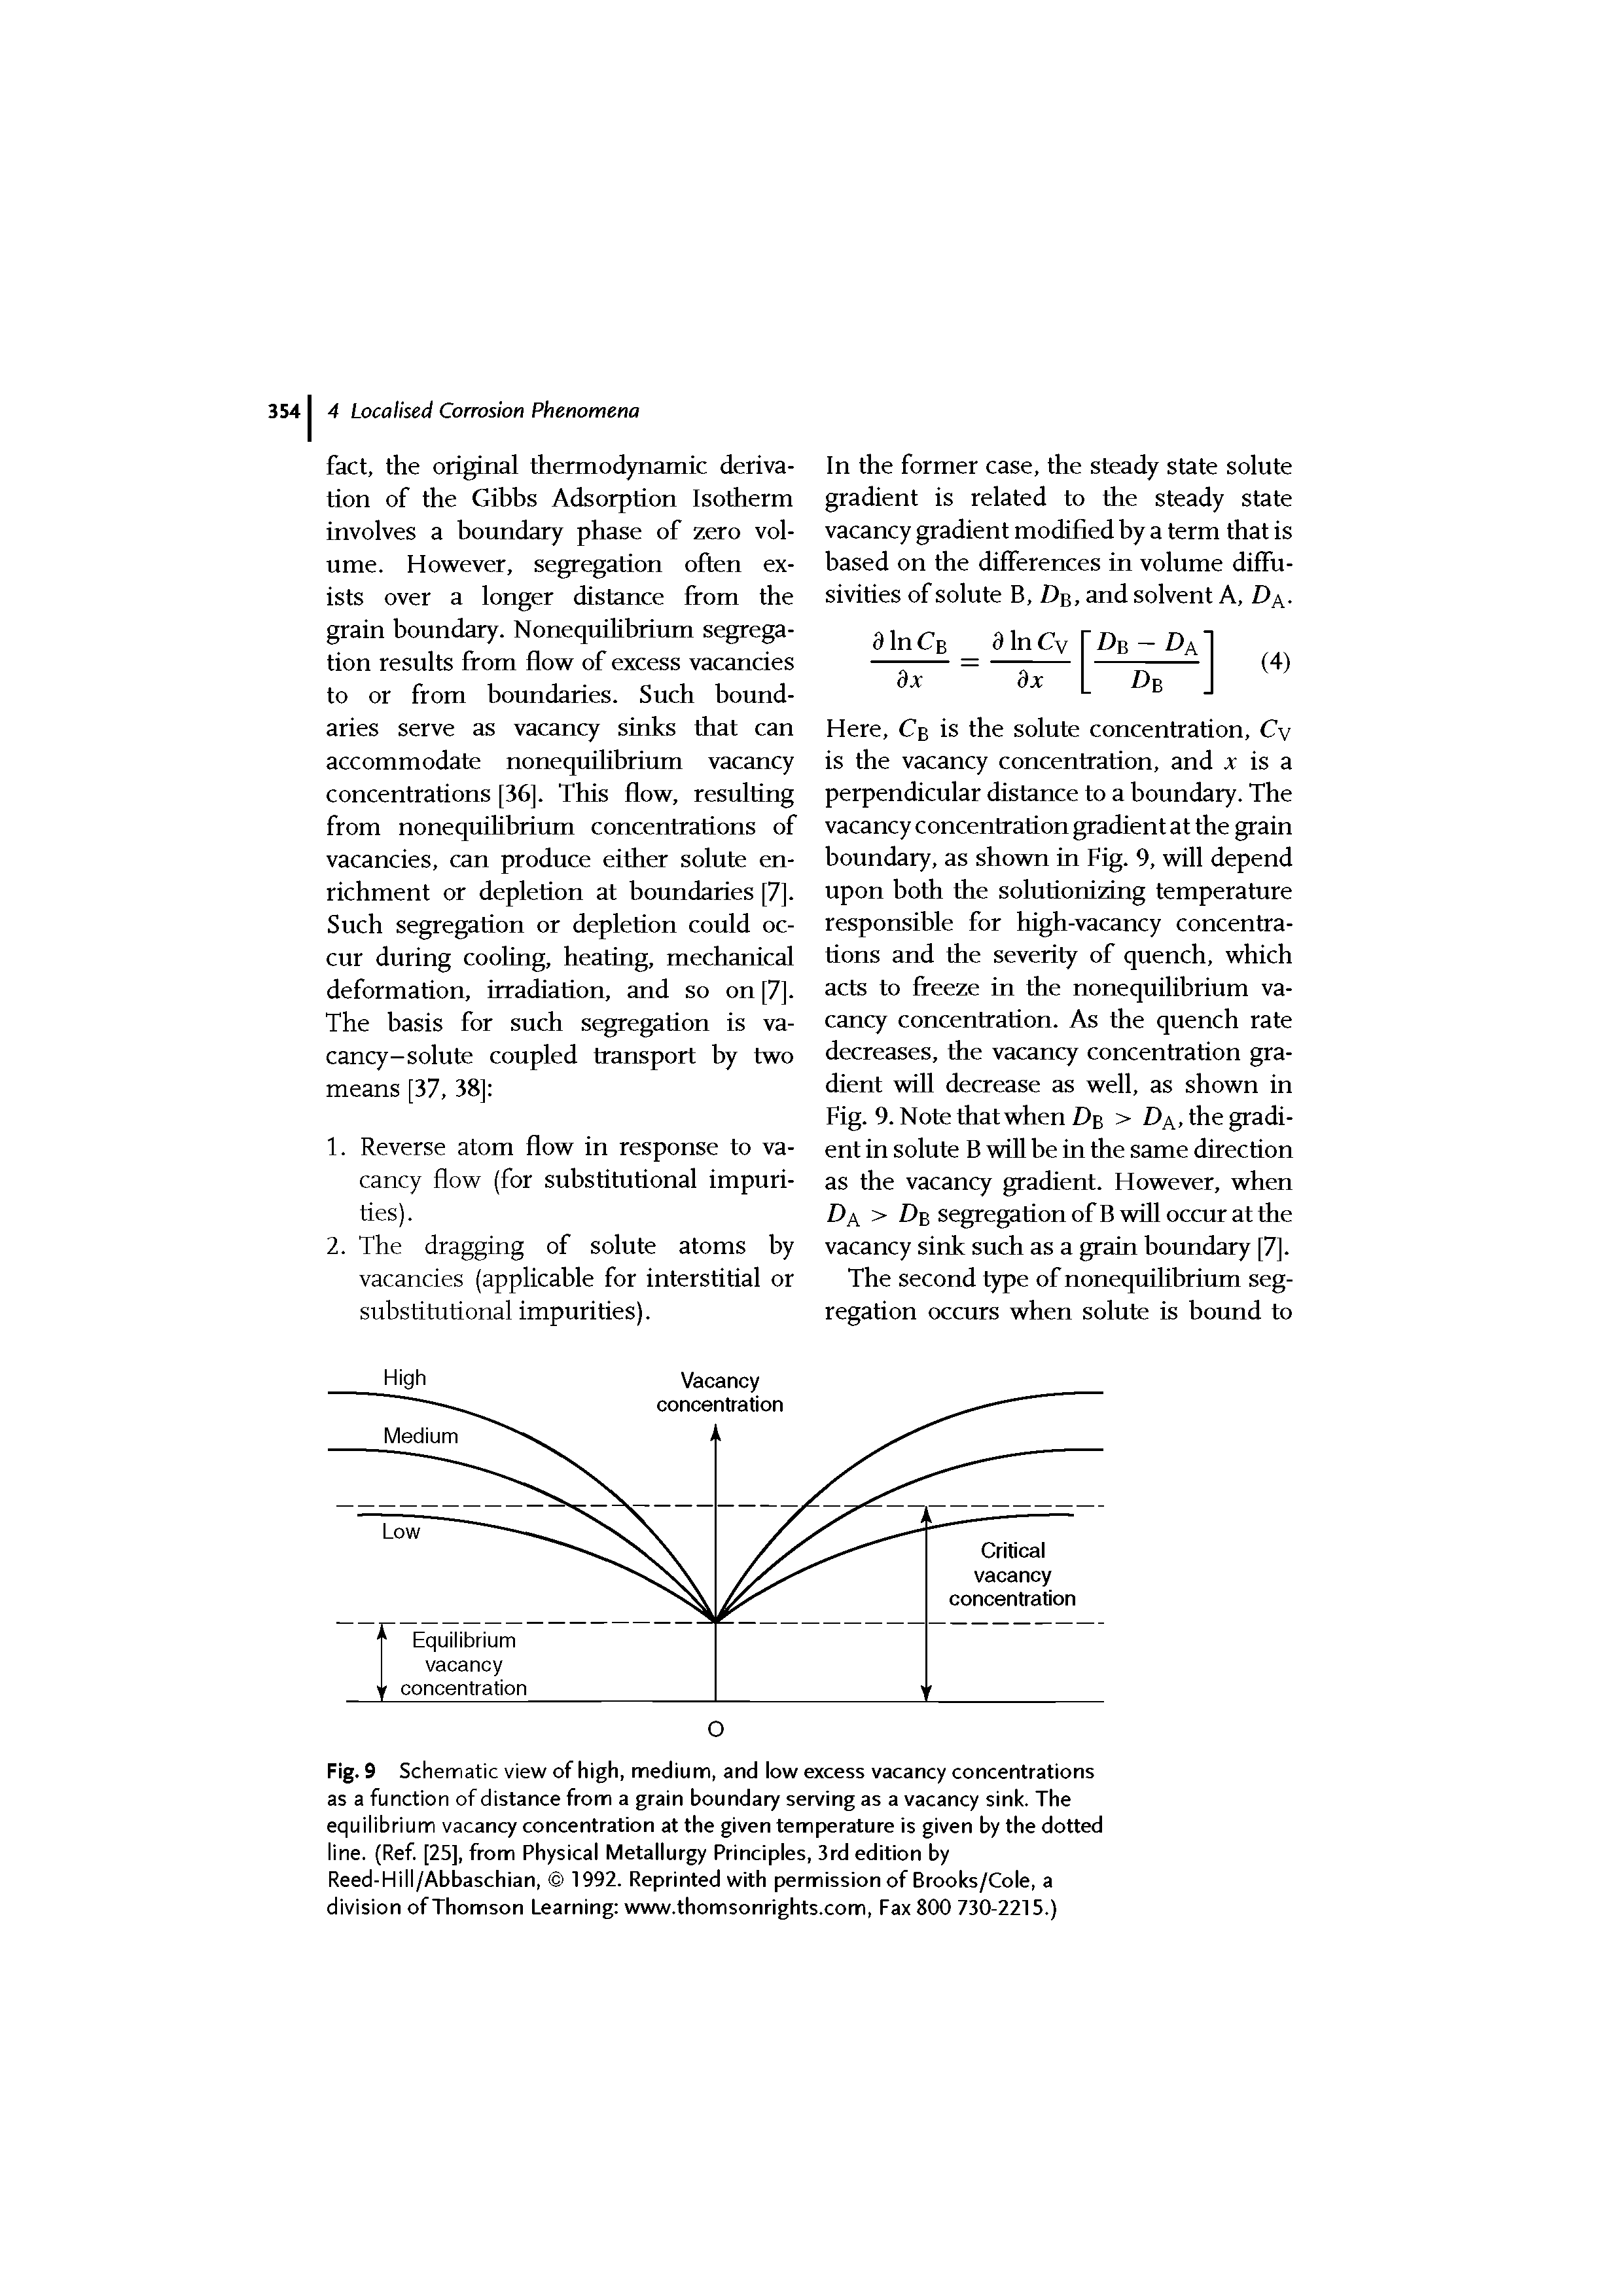 Fig. 9 Schematic view of high, medium, and iow excess vacancy concentrations as a function of distance from a grain boundary serving as a vacancy sink. The equilibrium vacancy concentration at the given temperature is given by the dotted line. (Ref. [25], from Physical Metallurgy Principles, 3rd edition by Reed-Hill/Abbaschian, 1992. Reprinted with permission of Brooks/Cole, a division of Thomson Learning www.thomsonrights.com, Fax 800 730-2215.)...